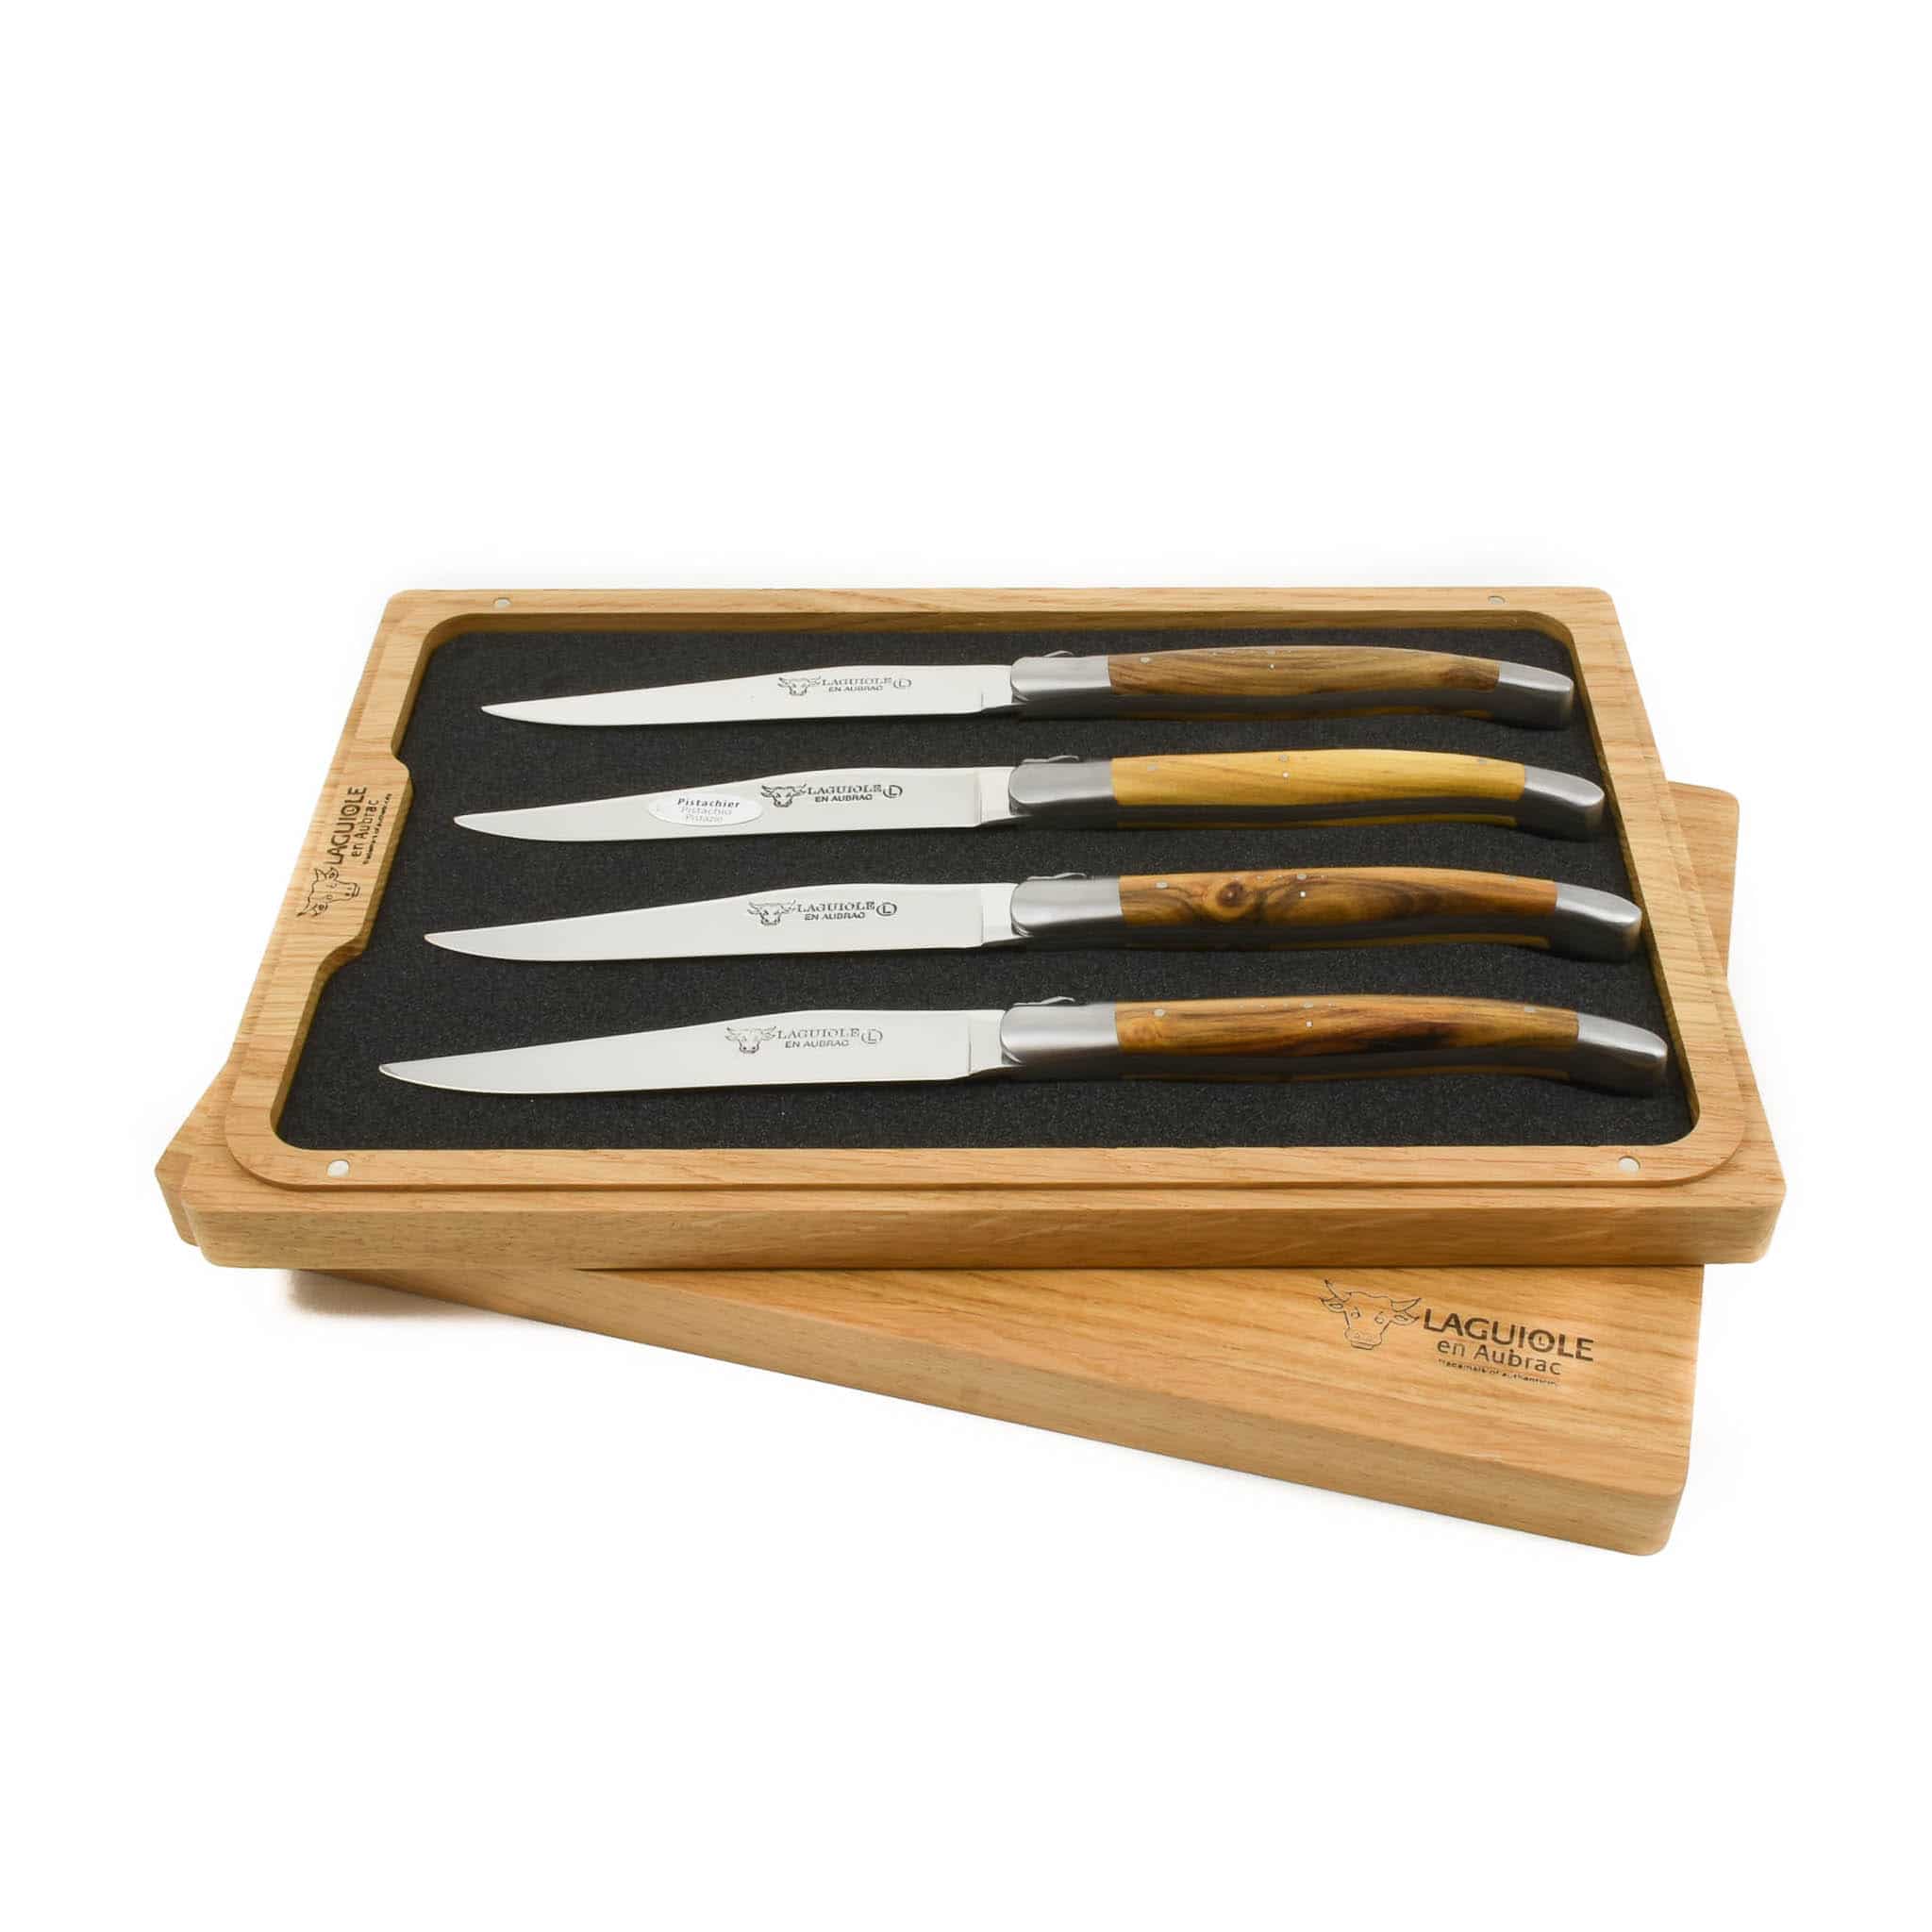 Vintage French Home Laguiole Steak Knives (Set of 4) - Ruby Lane